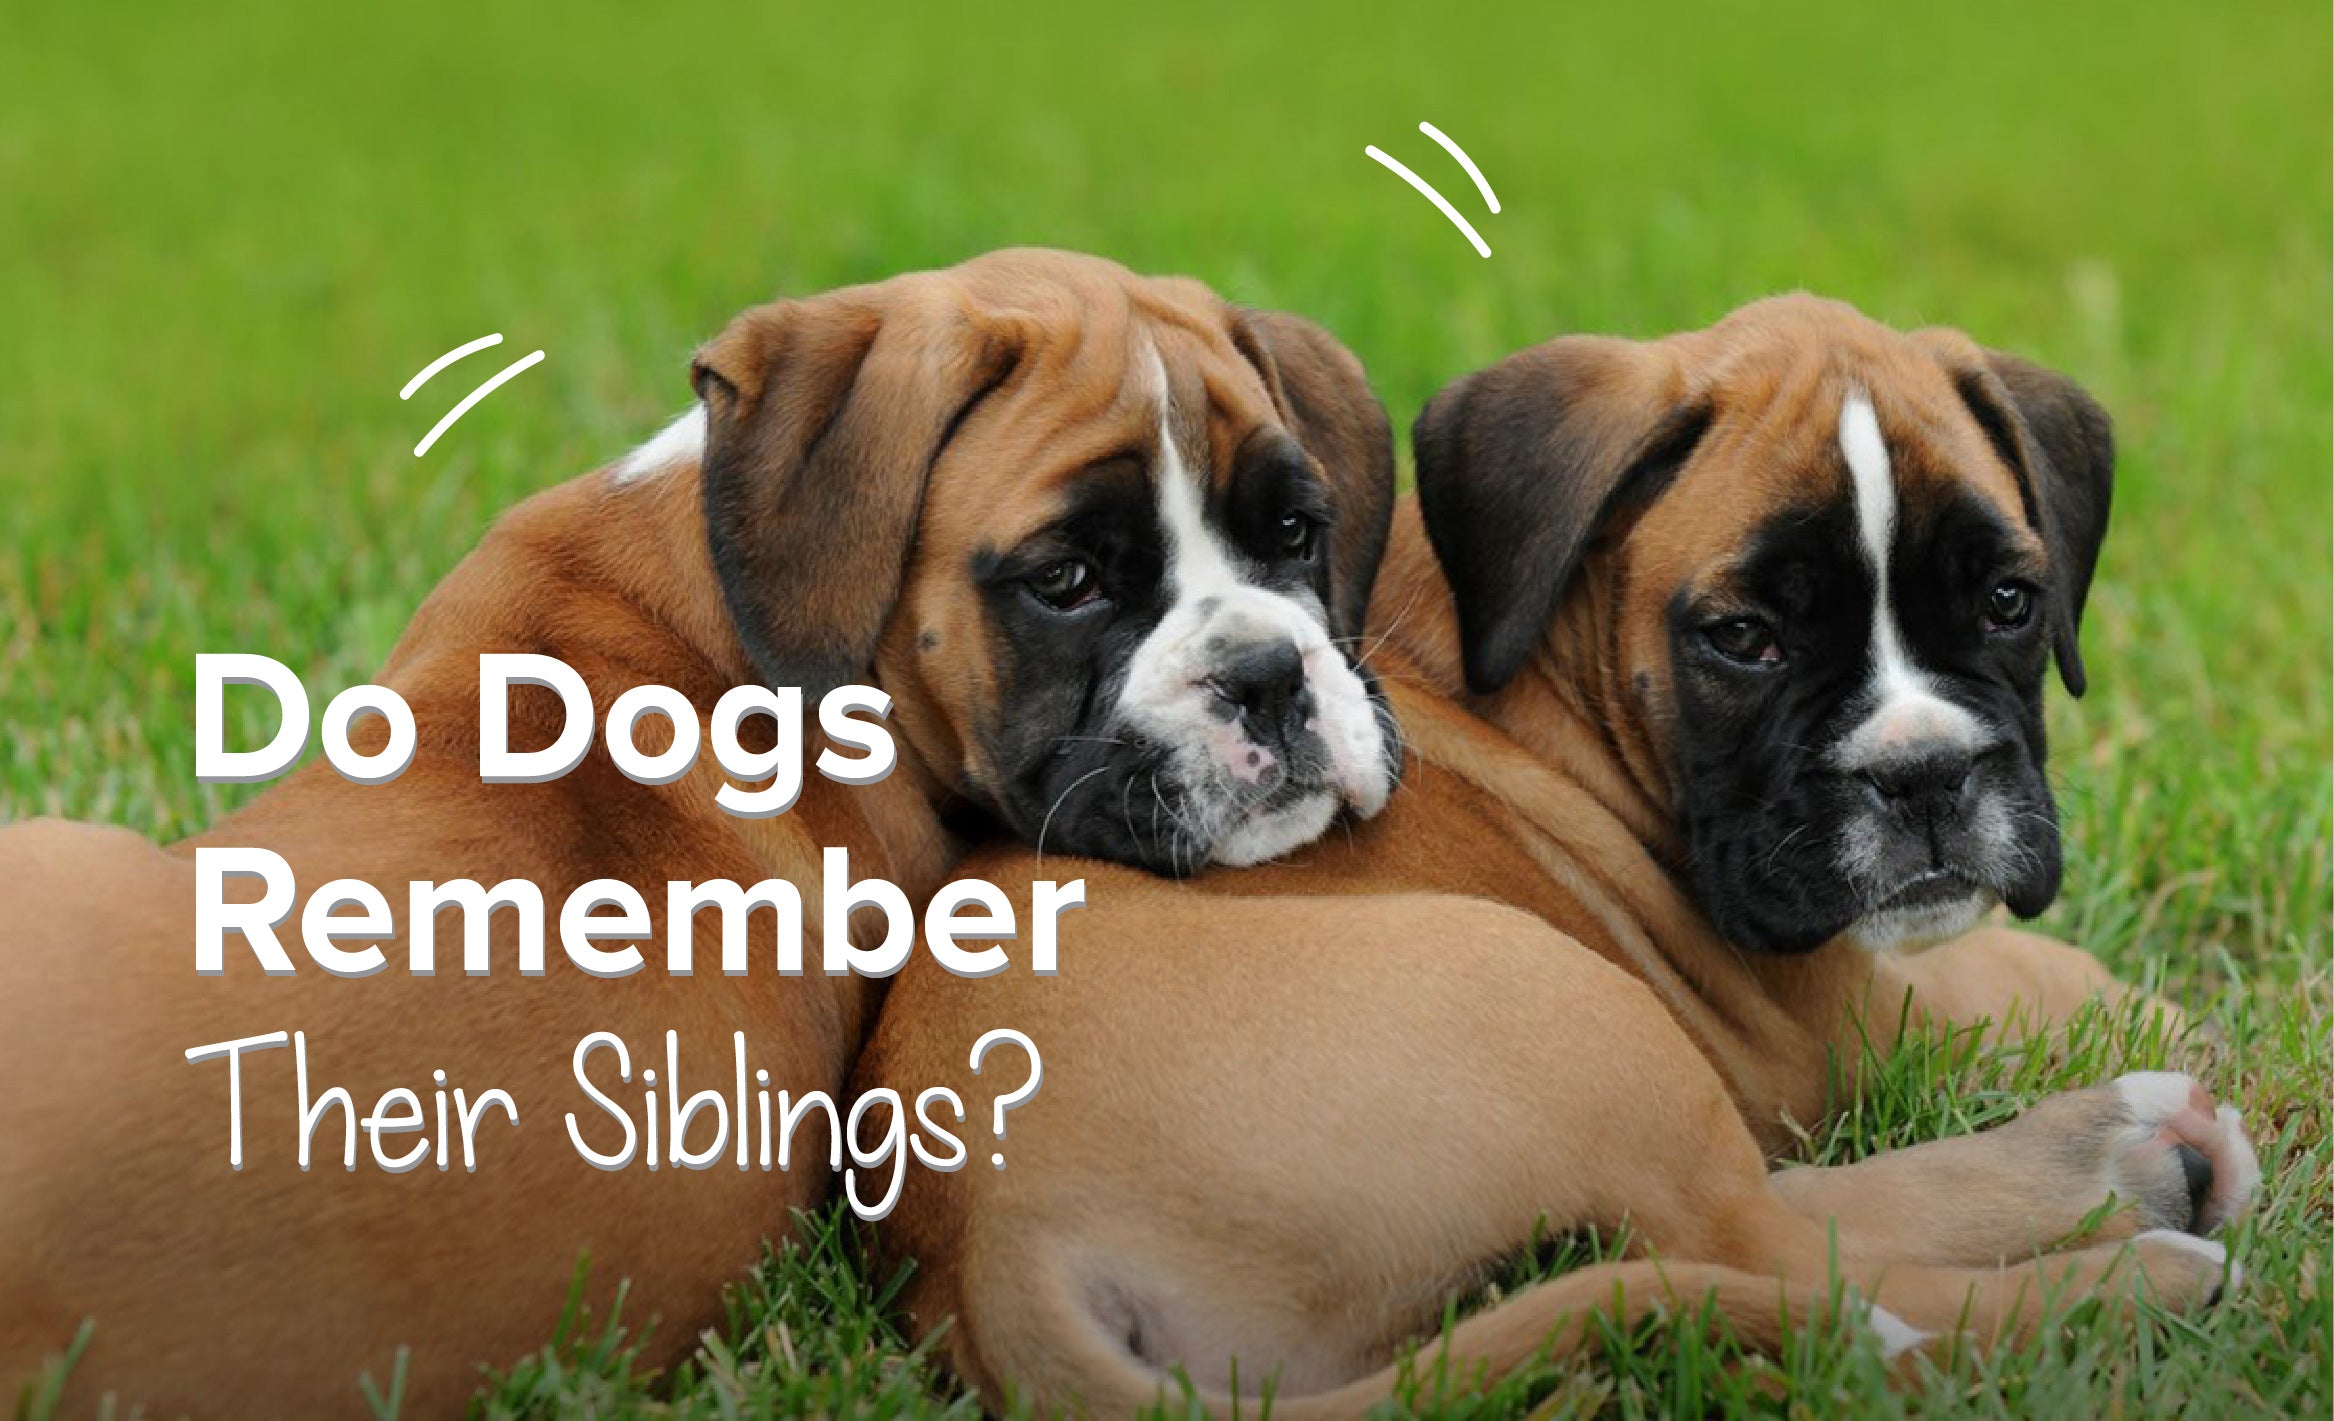 Do Dogs Remember Their Siblings?